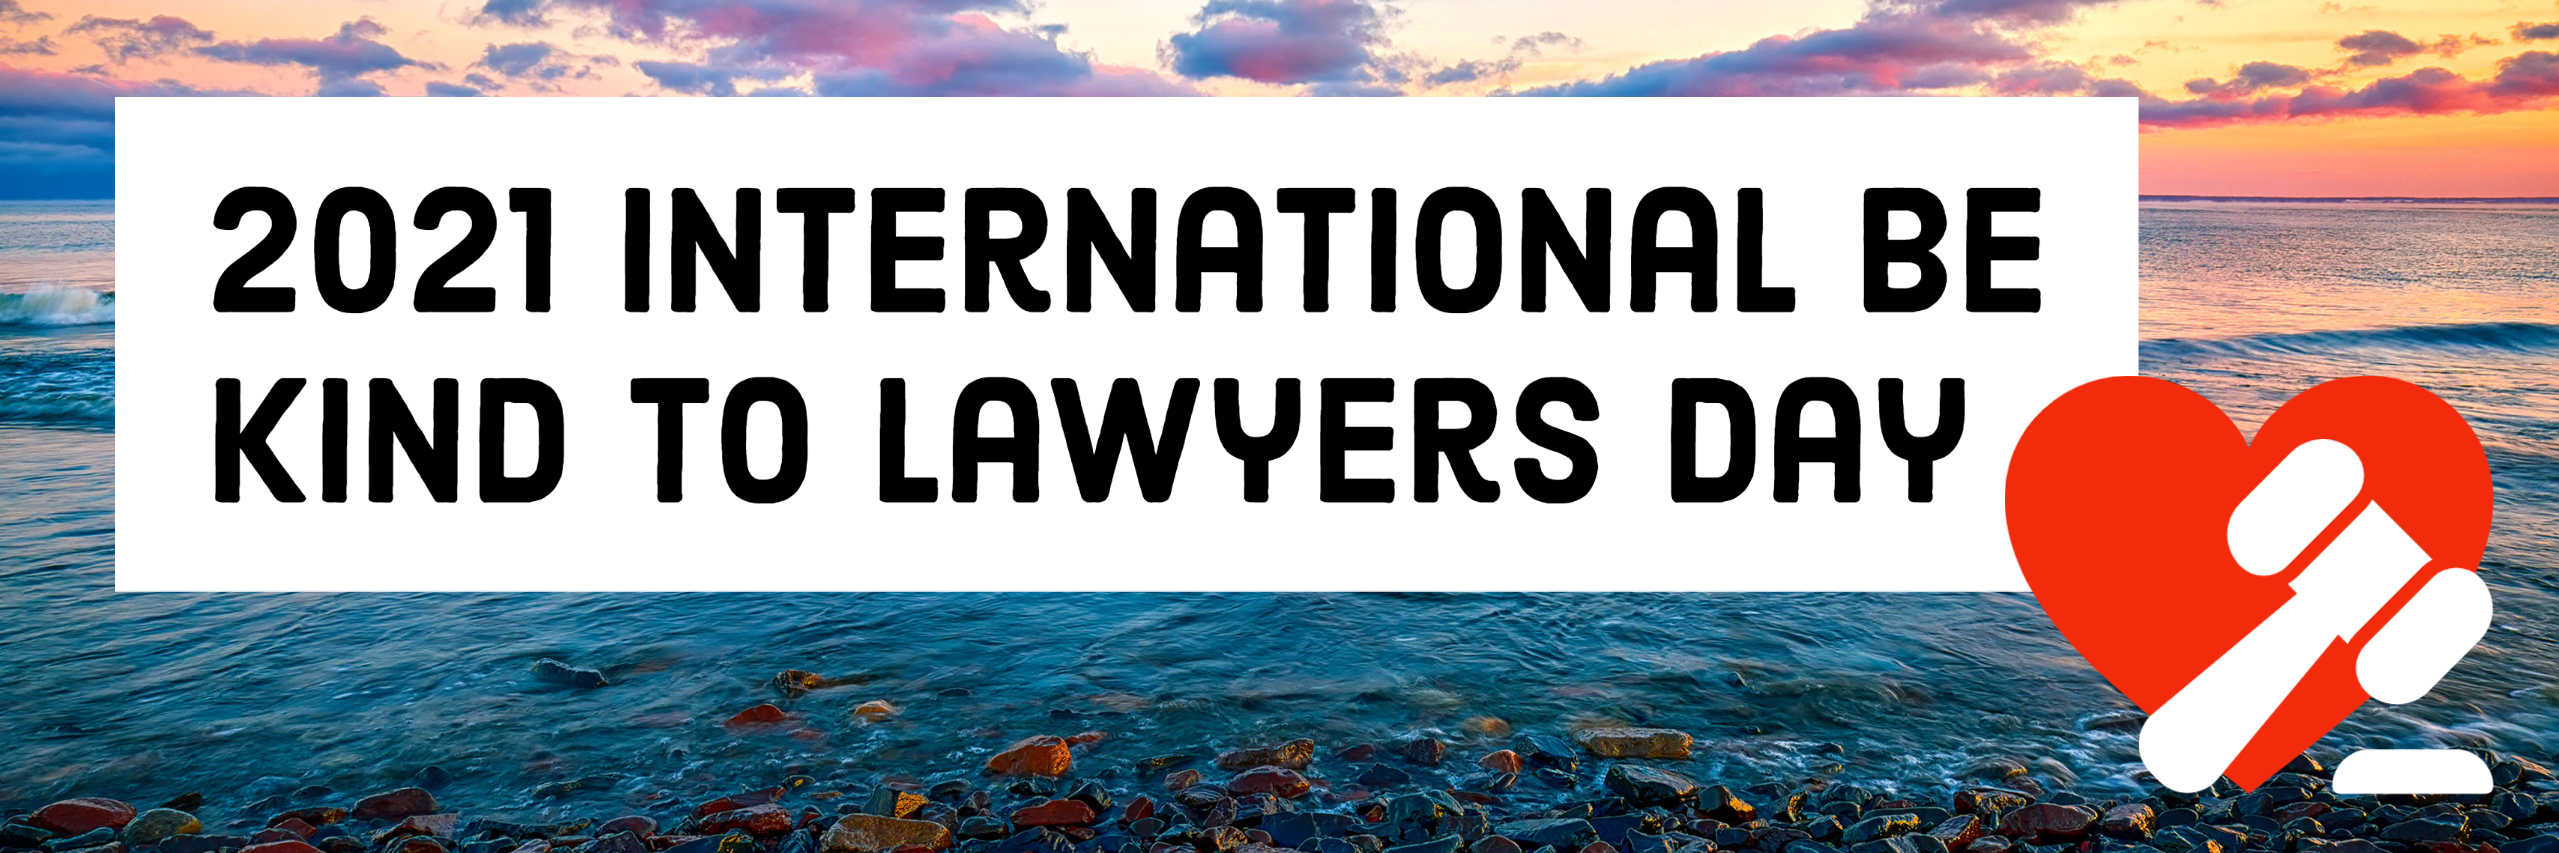 International Be Kind to Lawyers Day